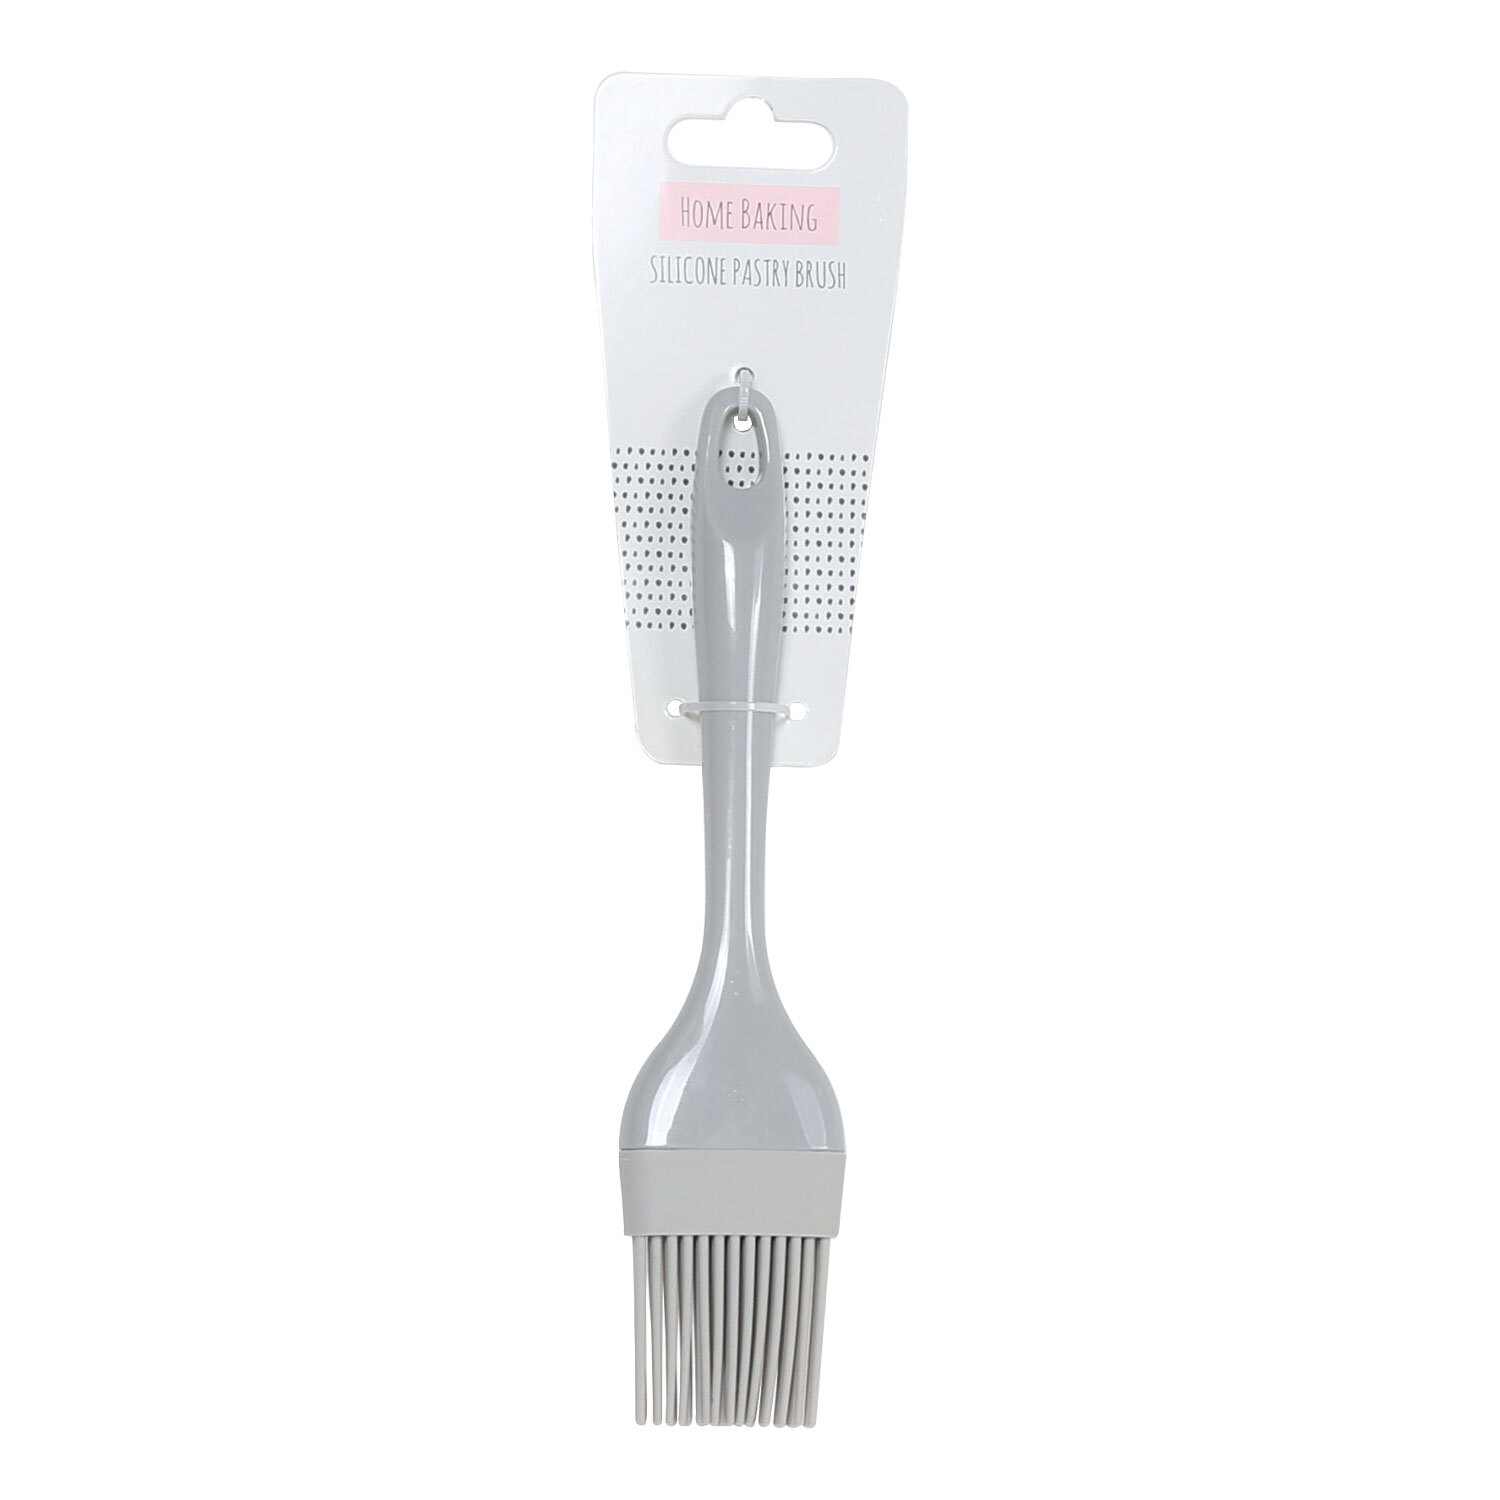 Silicone Pastry Brush Image 1